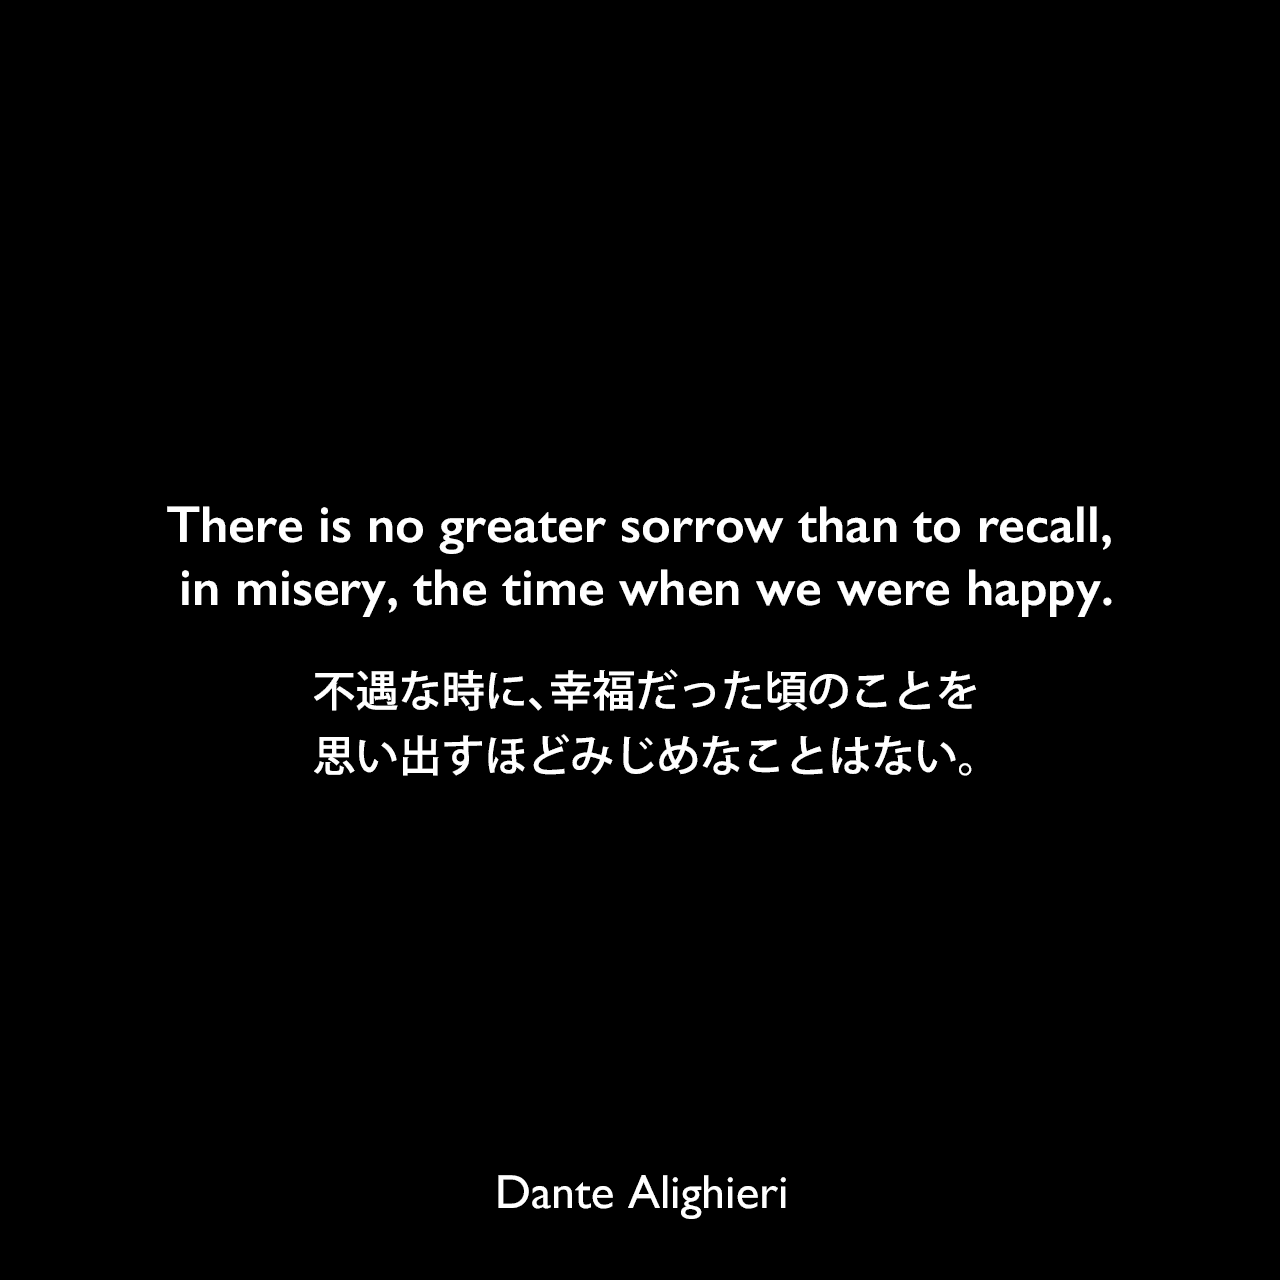 There is no greater sorrow than to recall, in misery, the time when we were happy.不遇な時に、幸福だった頃のことを思い出すほどみじめなことはない。Dante Alighieri